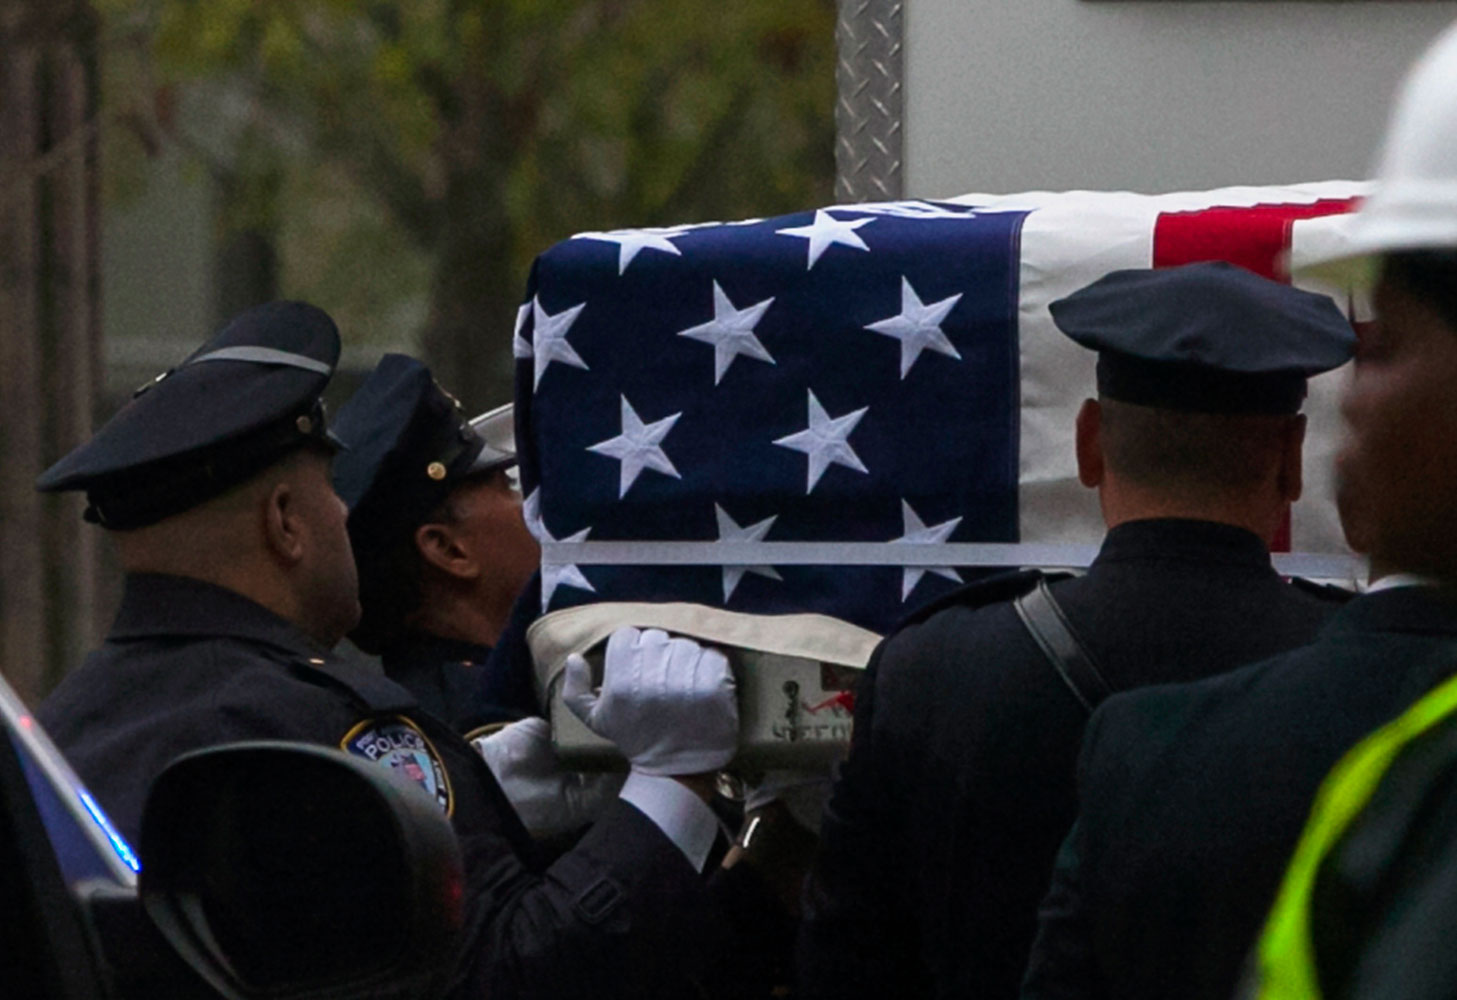 Emergency personnel carry a casket draped with a U.S. flag during the ceremonial transfer of the 9/11 unidentified remains to the OCME repository at the World Trade Center site, in New York